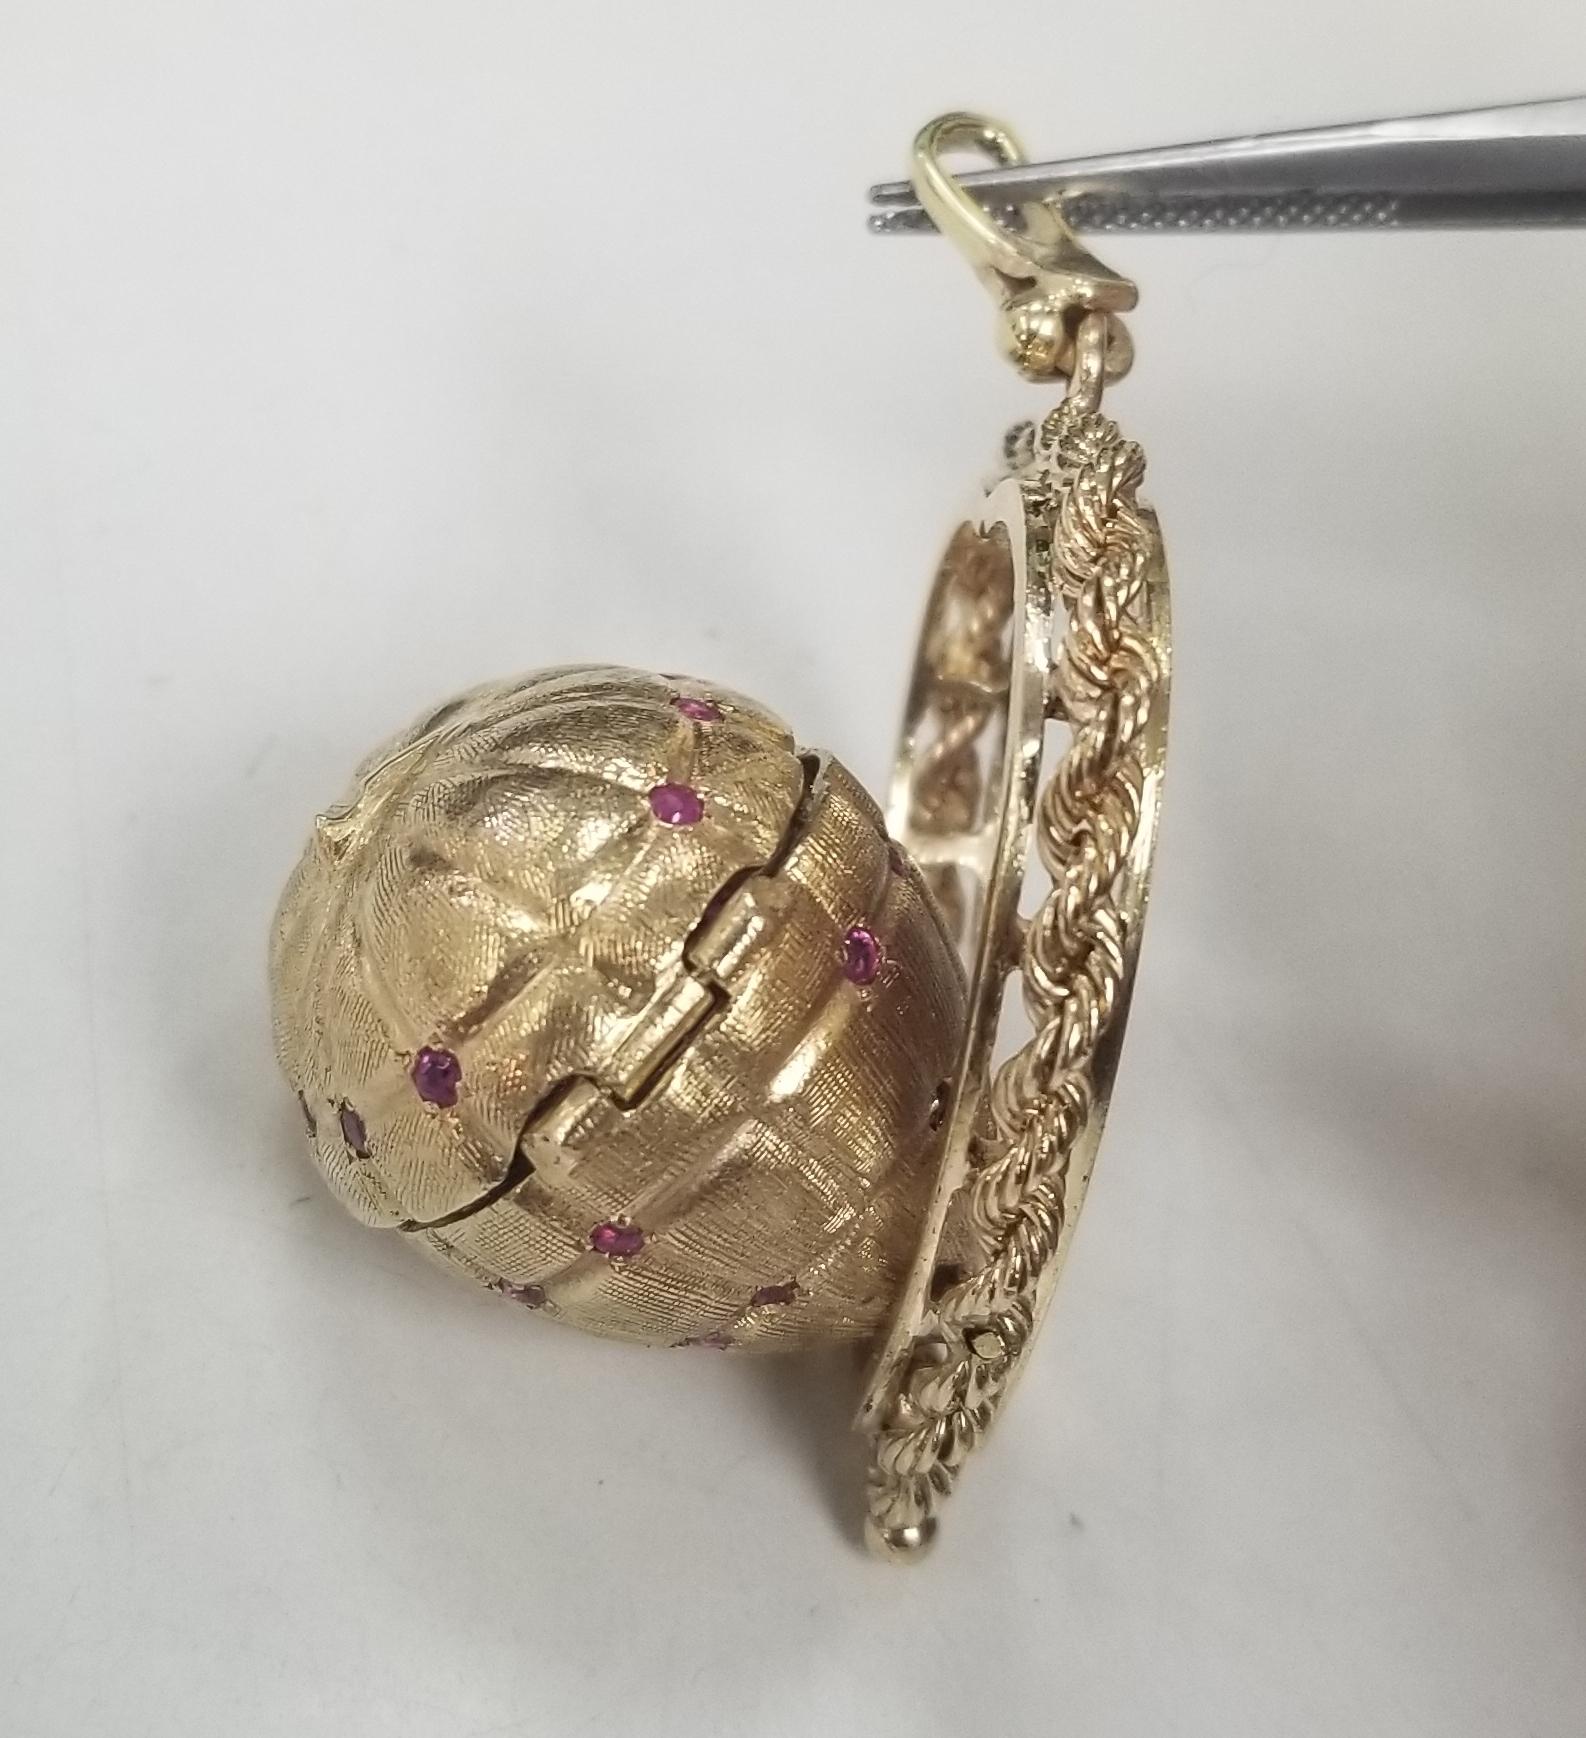 14k gold heart locket necklace with picture inside